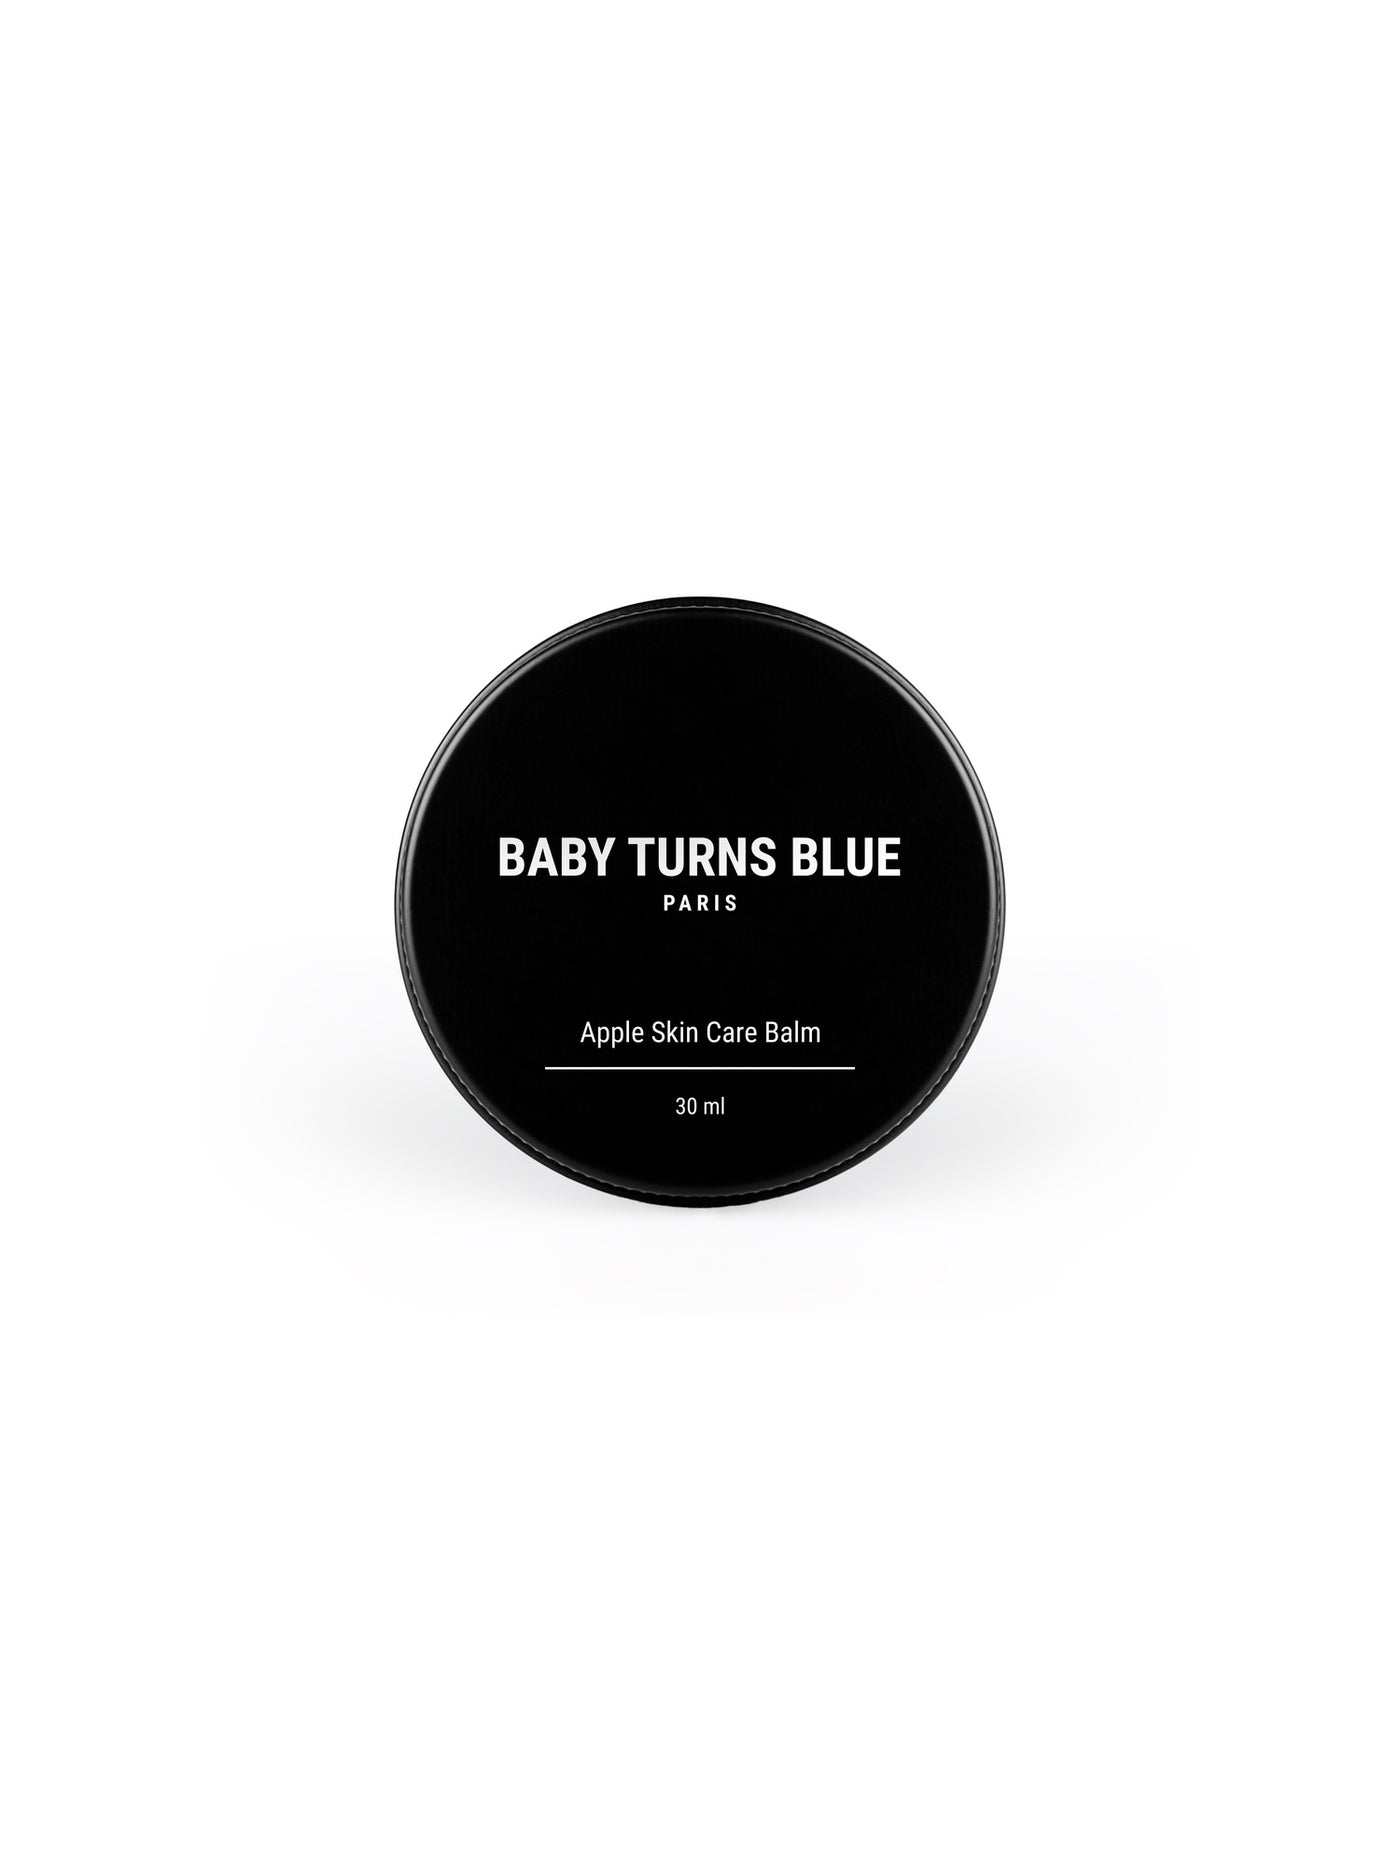 Front view of Apple Skin Care Balm by Baby turns Blue